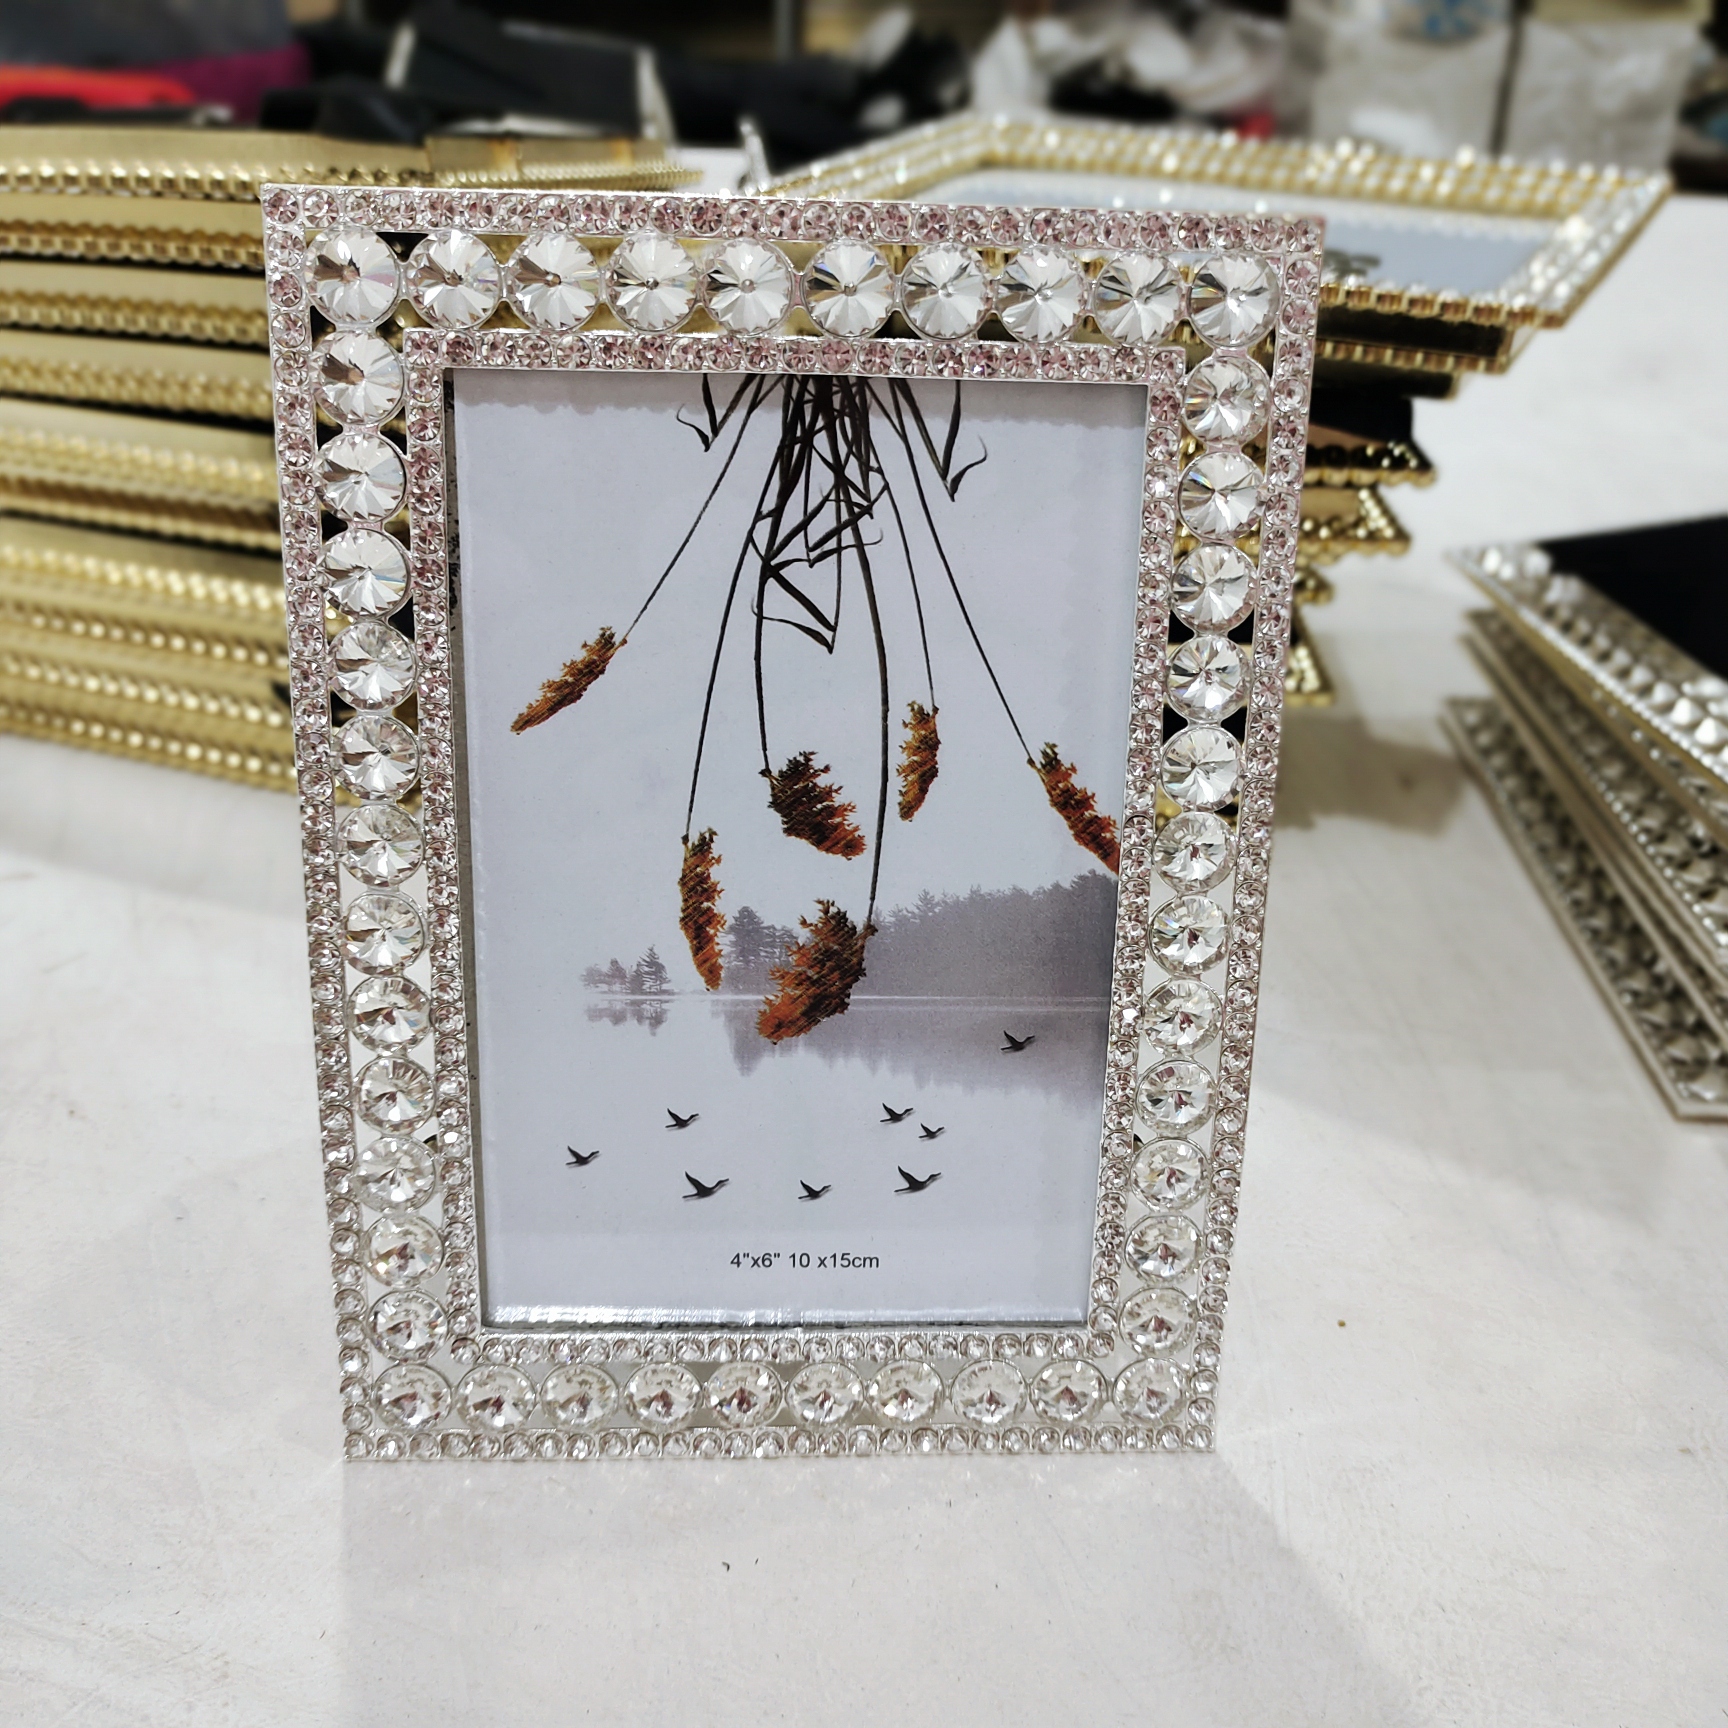 Rhinestone picture frame, new style customized